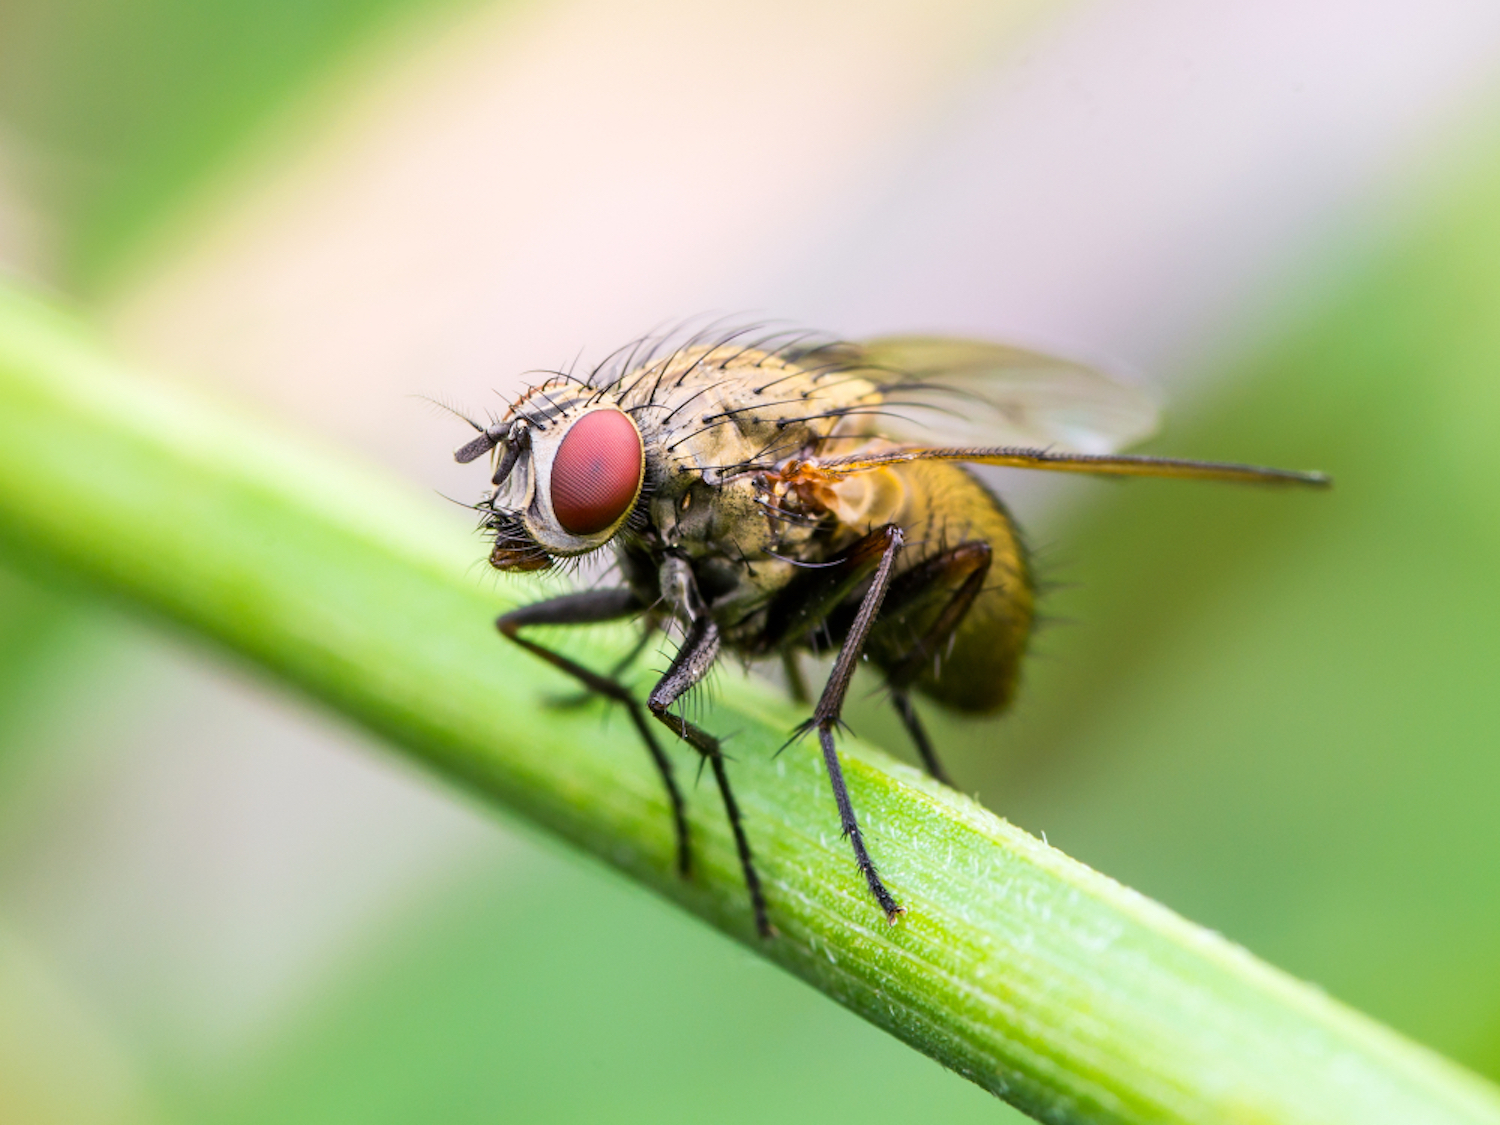 The 10 Most Common Fruit Fly Questions Answered